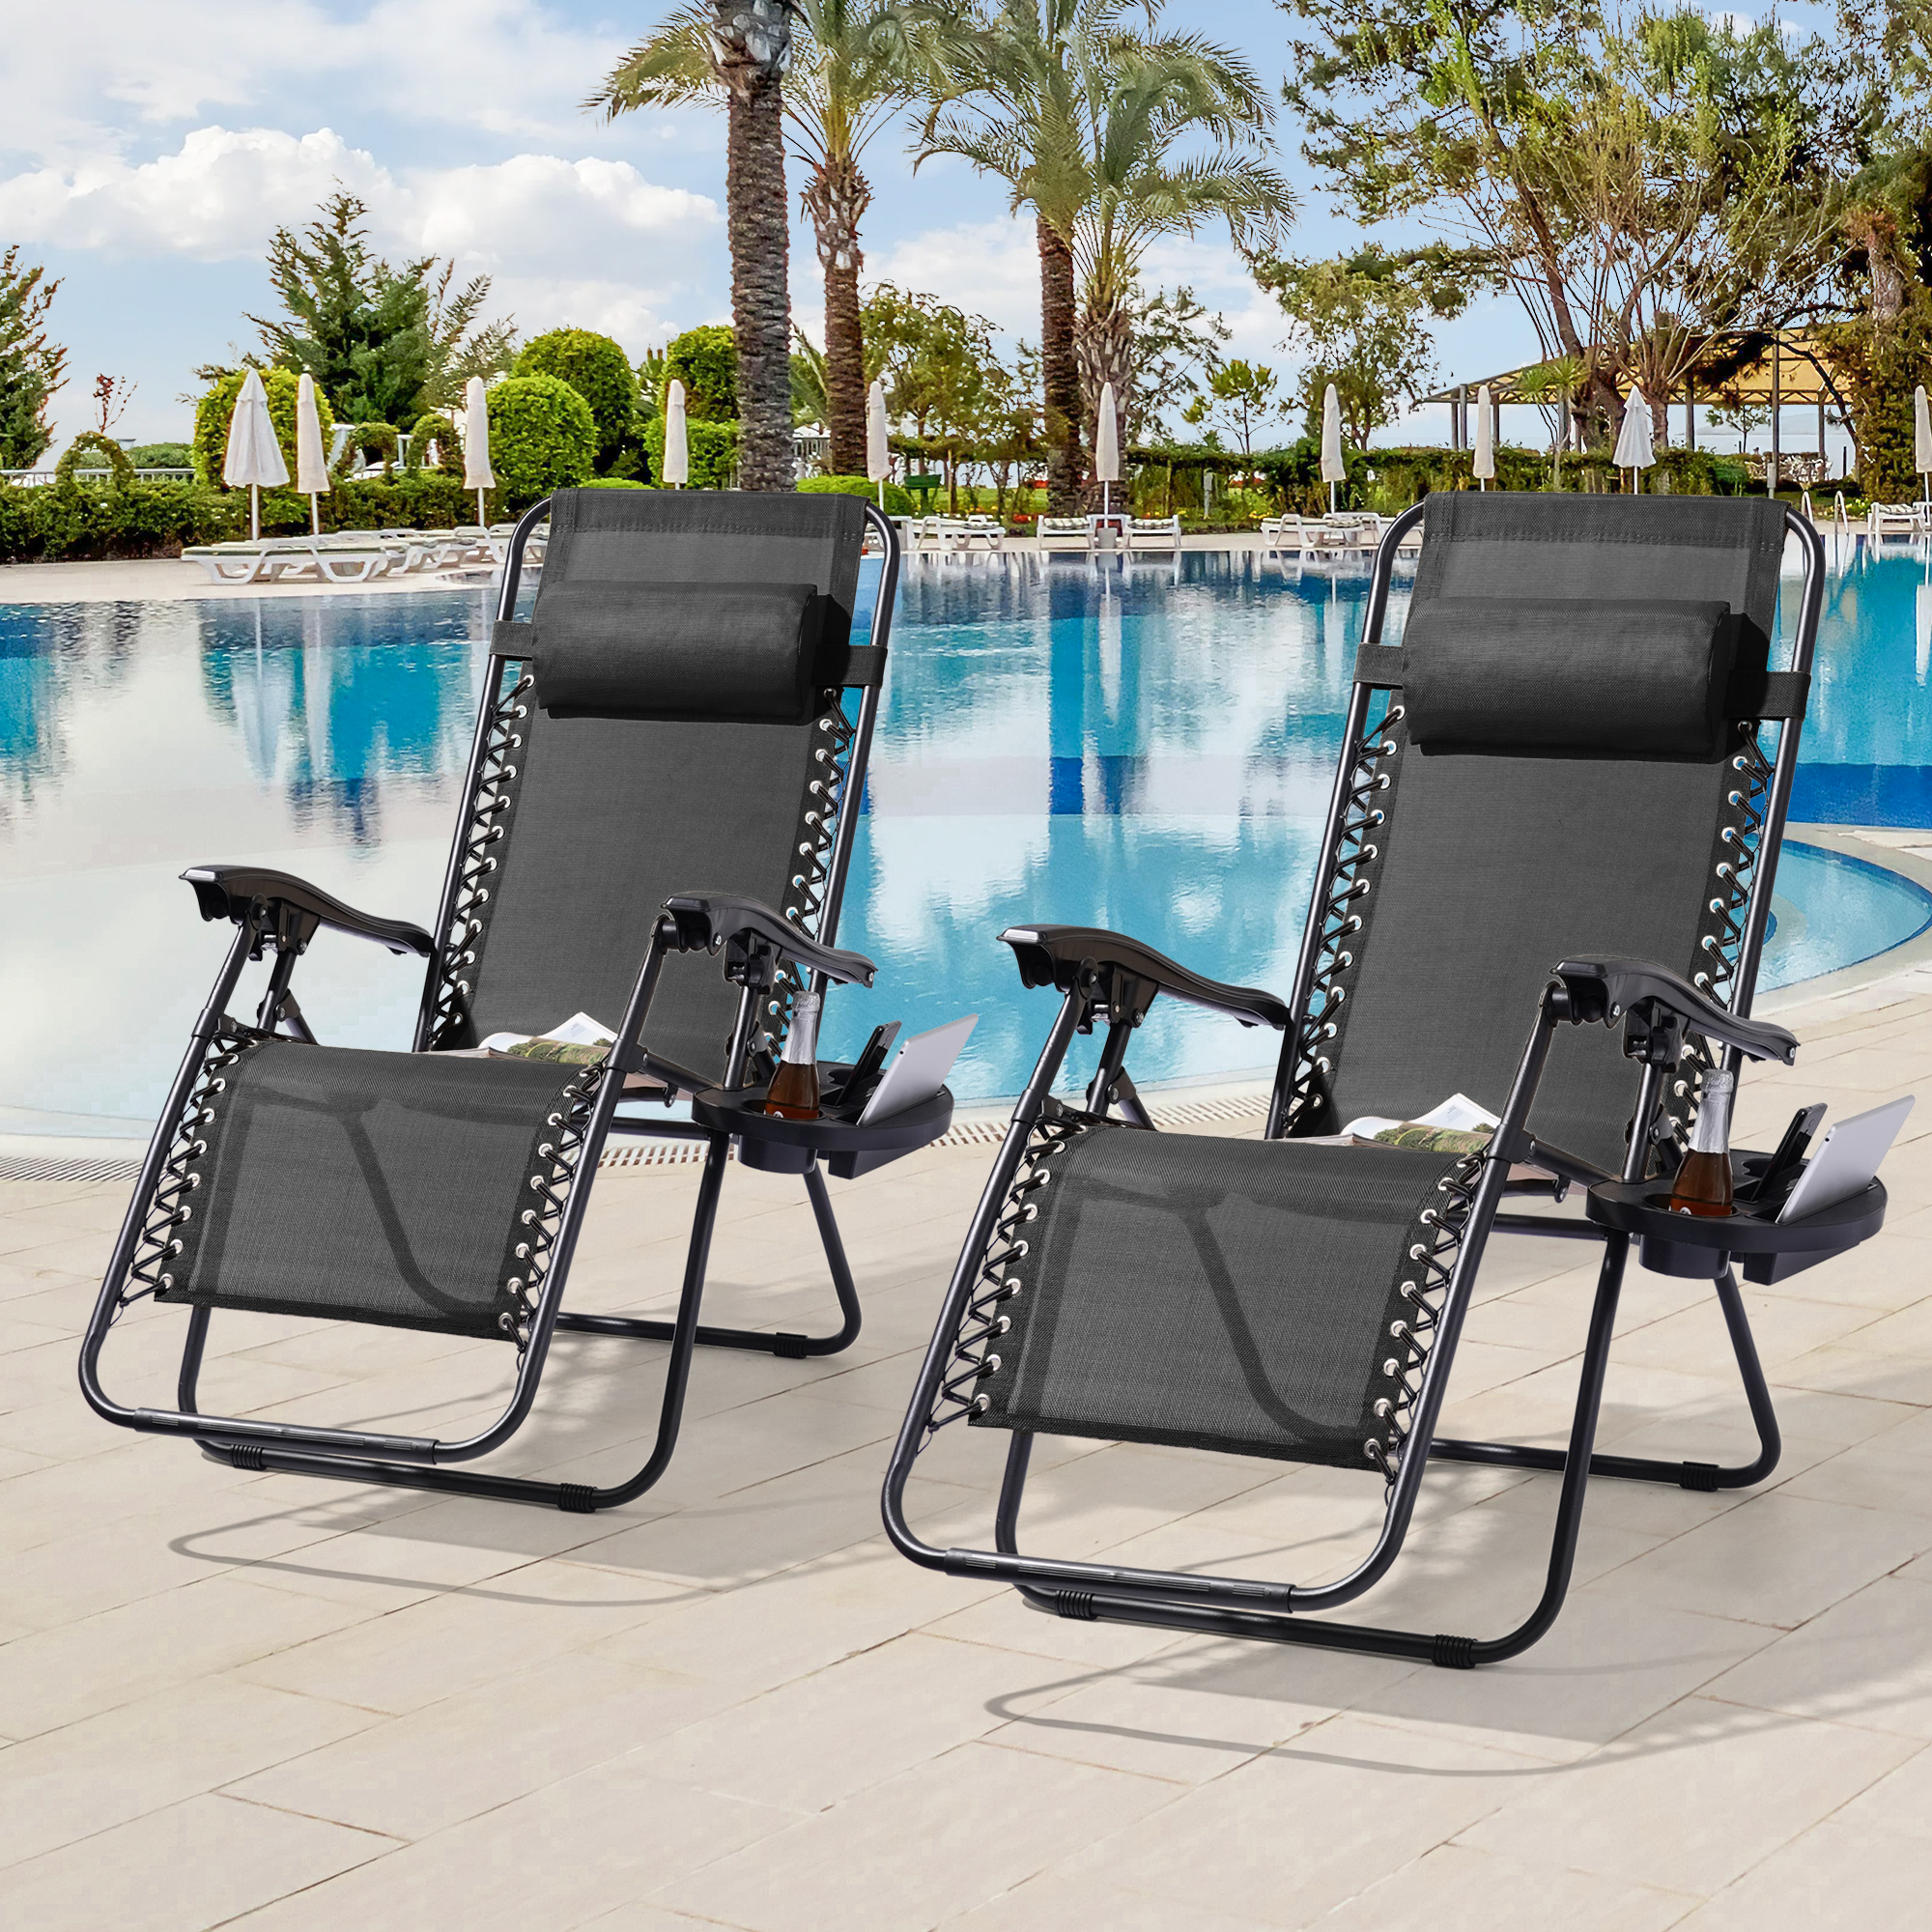 Sonerlic 2 Pcs Outdoor Patio Adjustable Zero Gravity Chair with a Side Tray for Patio,Deck,Poolside and Garden, Black - image 1 of 7